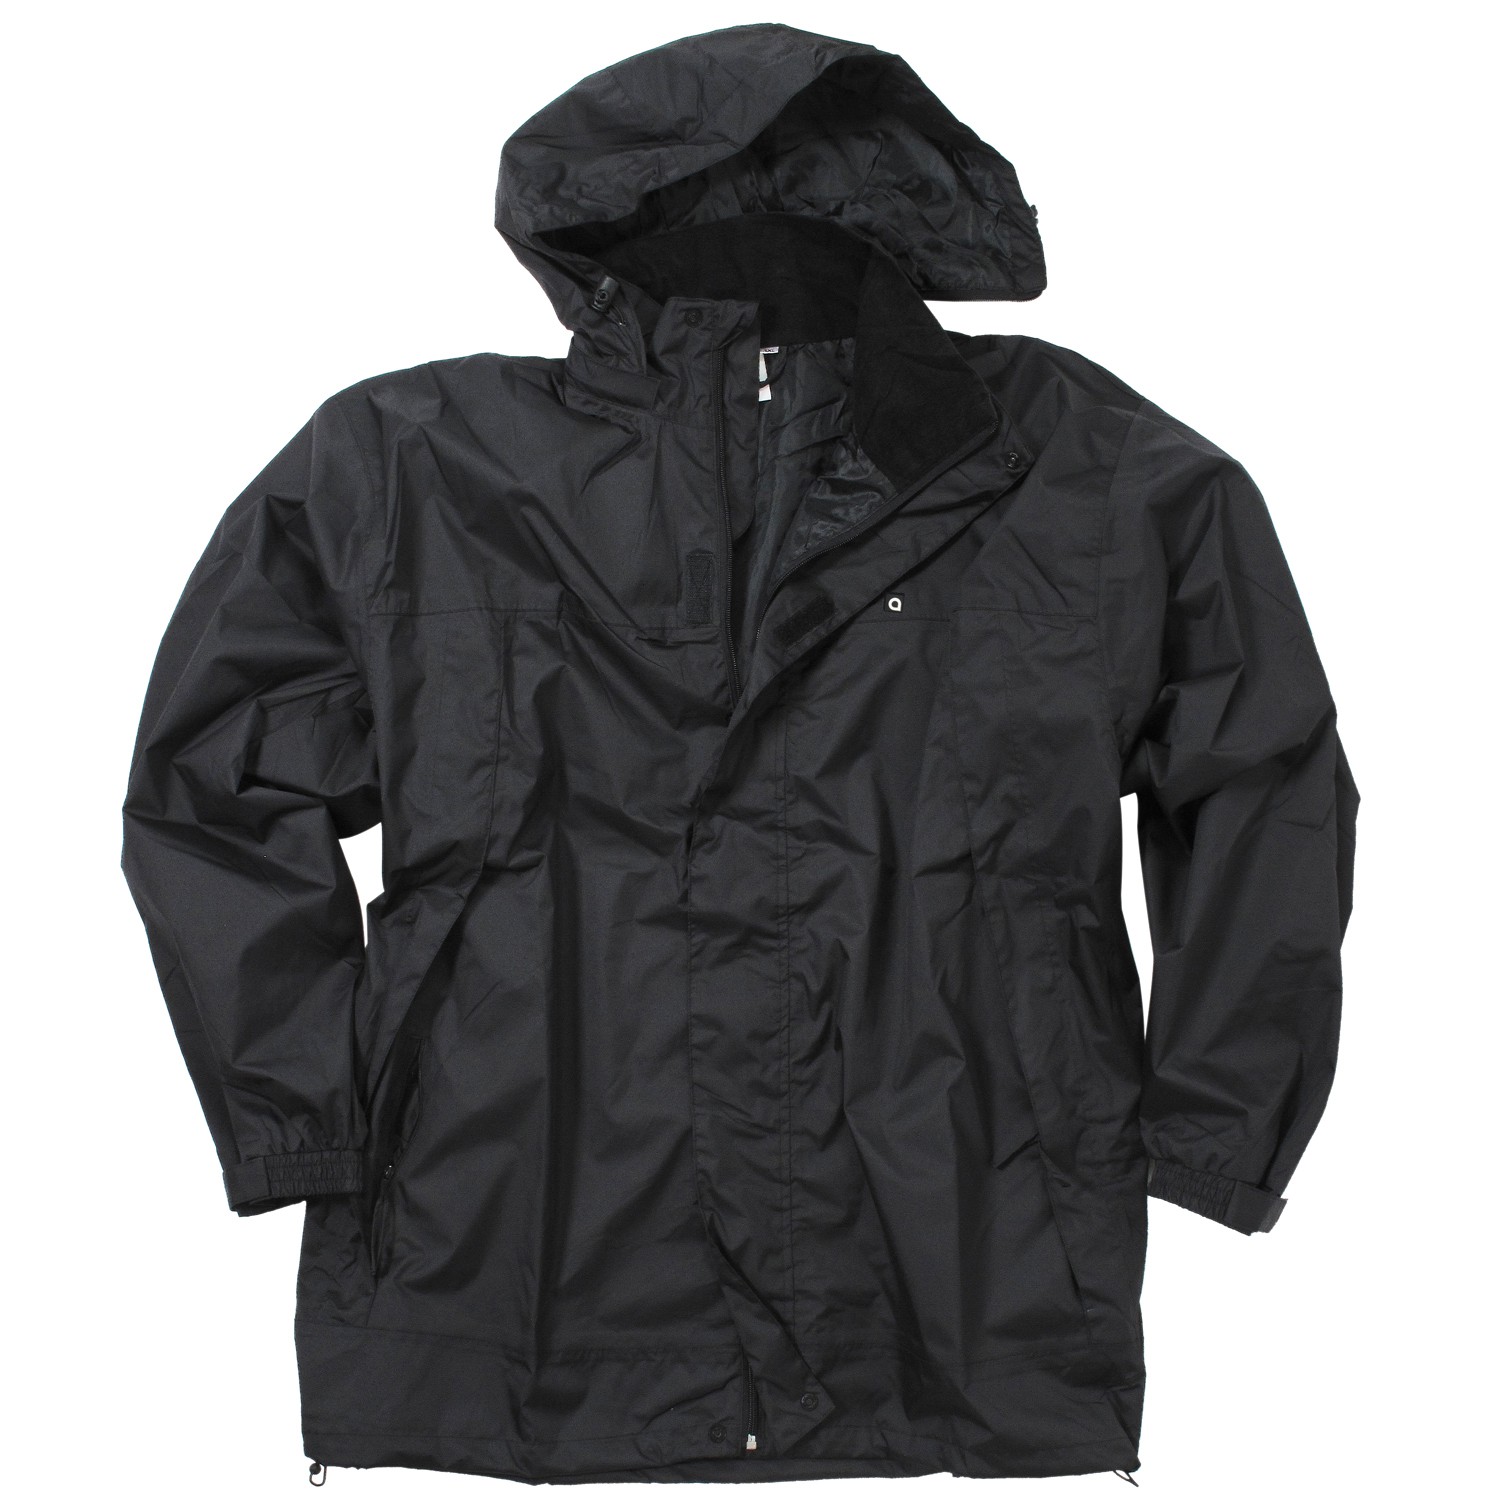 Black rain jacket from Aero in king sizes up to 8 XL